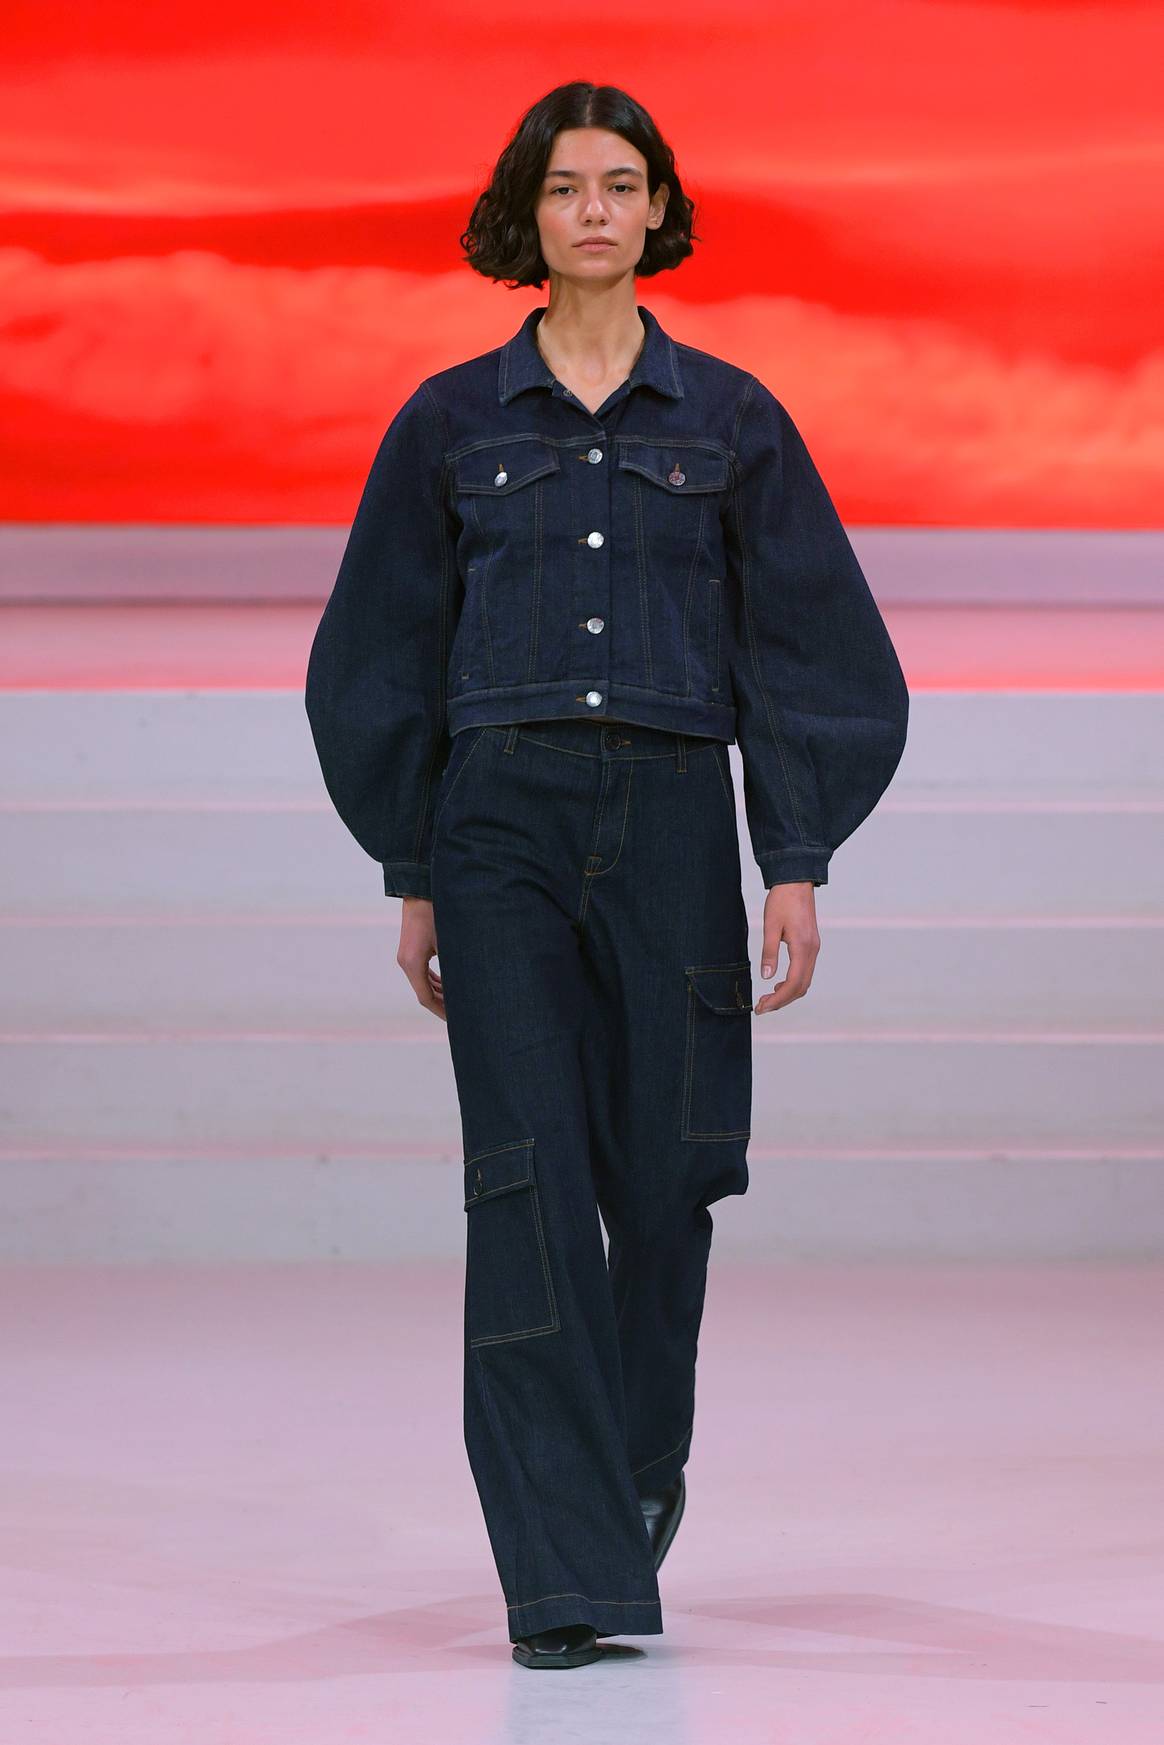 Tomorrow Denim presented loose-fitting silhouettes in raw denim for autumn 2022. Image: Catwalkpictures